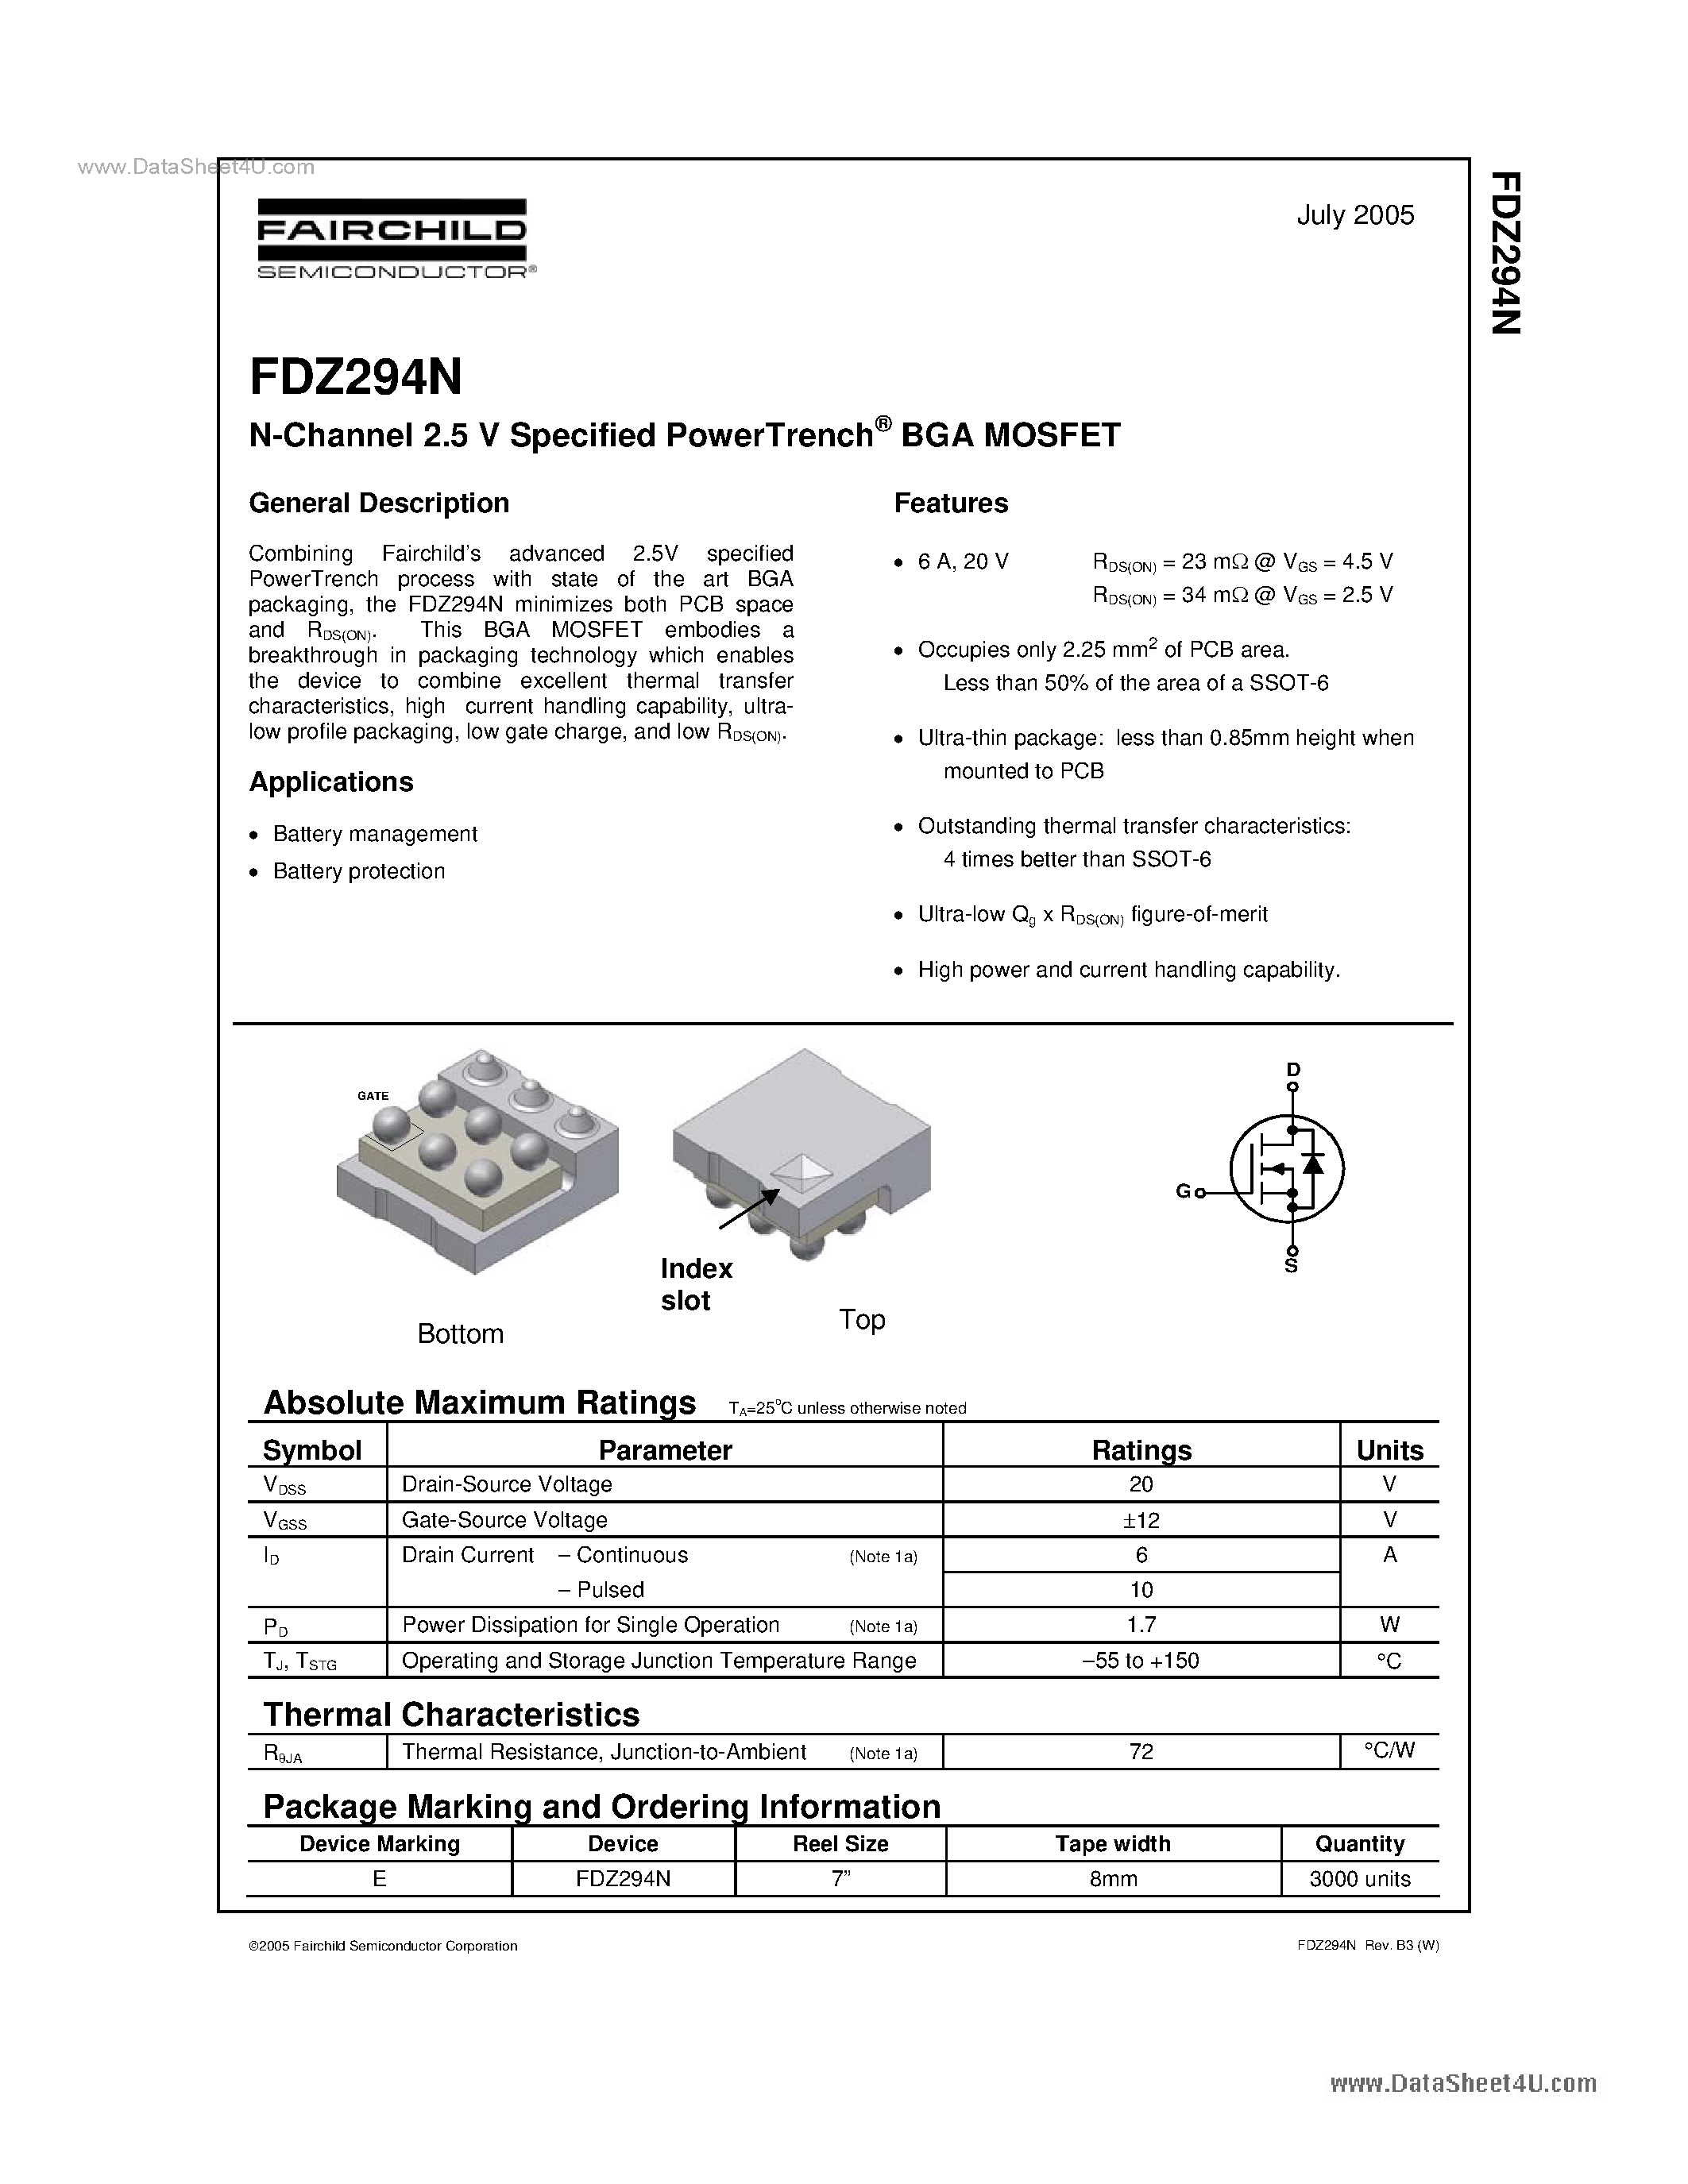 Даташит FDZ294N - N-Channel 2.5 V Specified PowerTrench BGA MOSFET страница 1